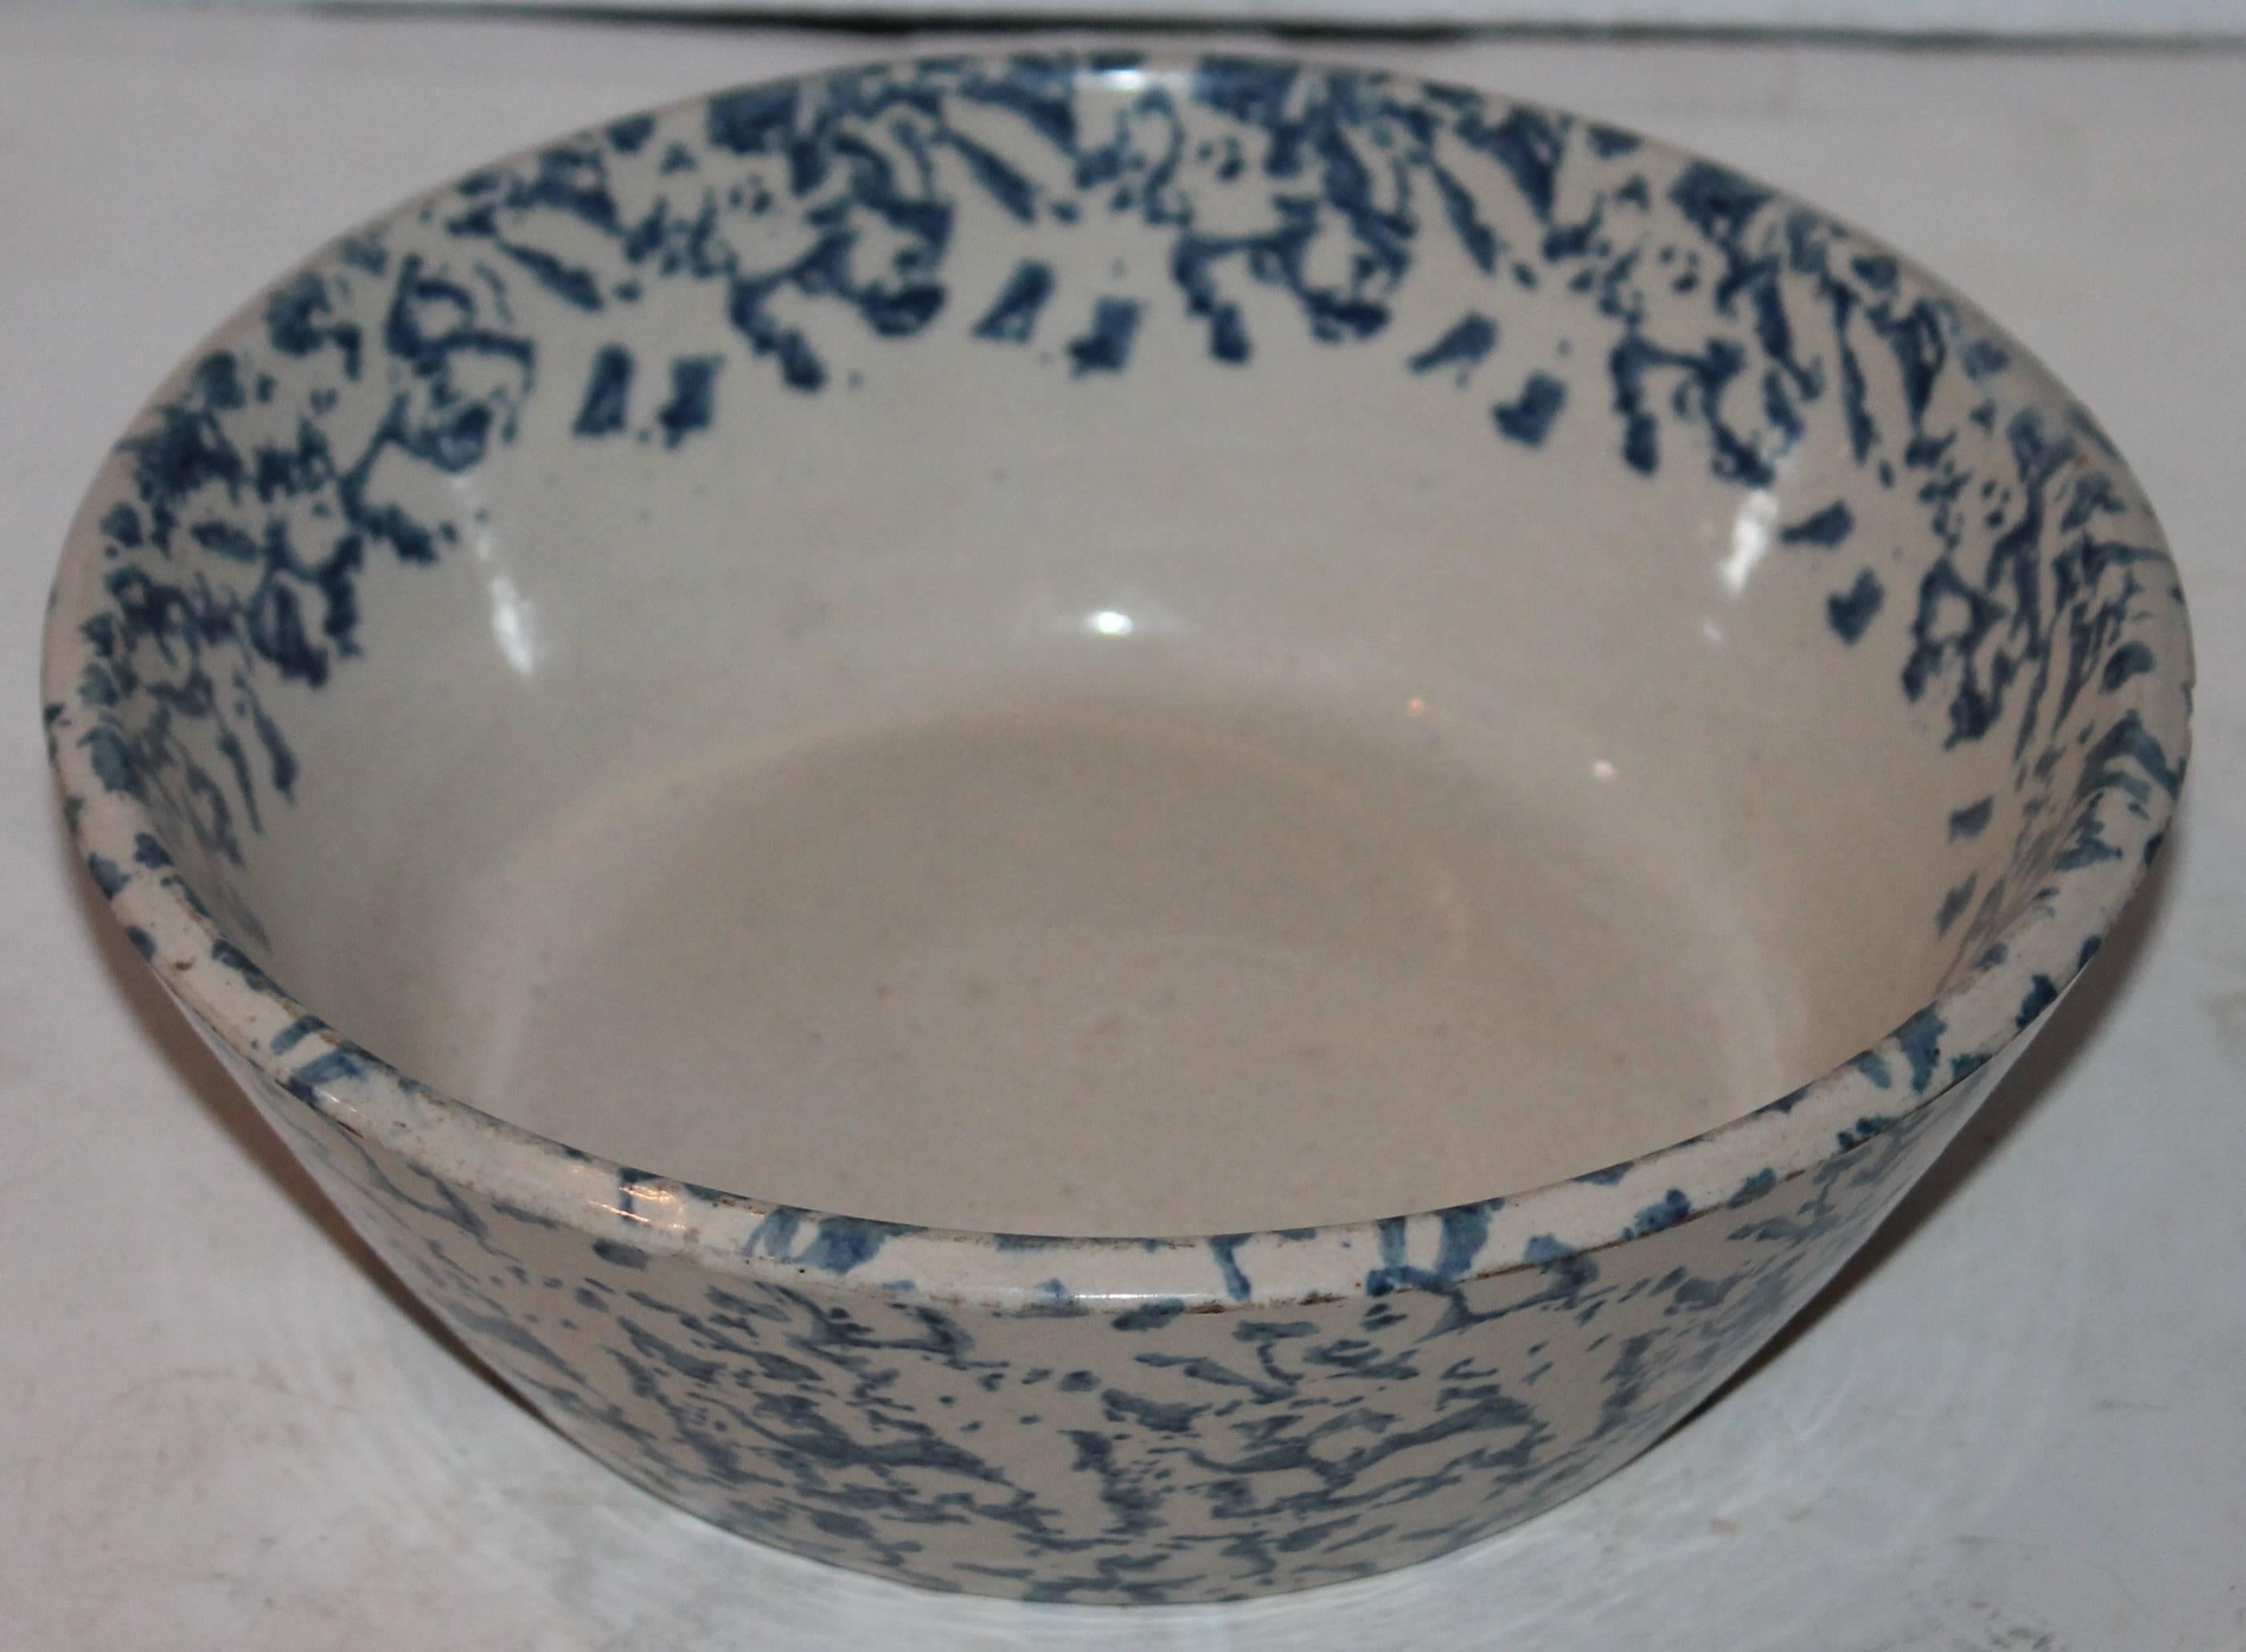 19th century spongeware cream bowl in good condition. This is an unusual form. The color is a lighter indigo blue.